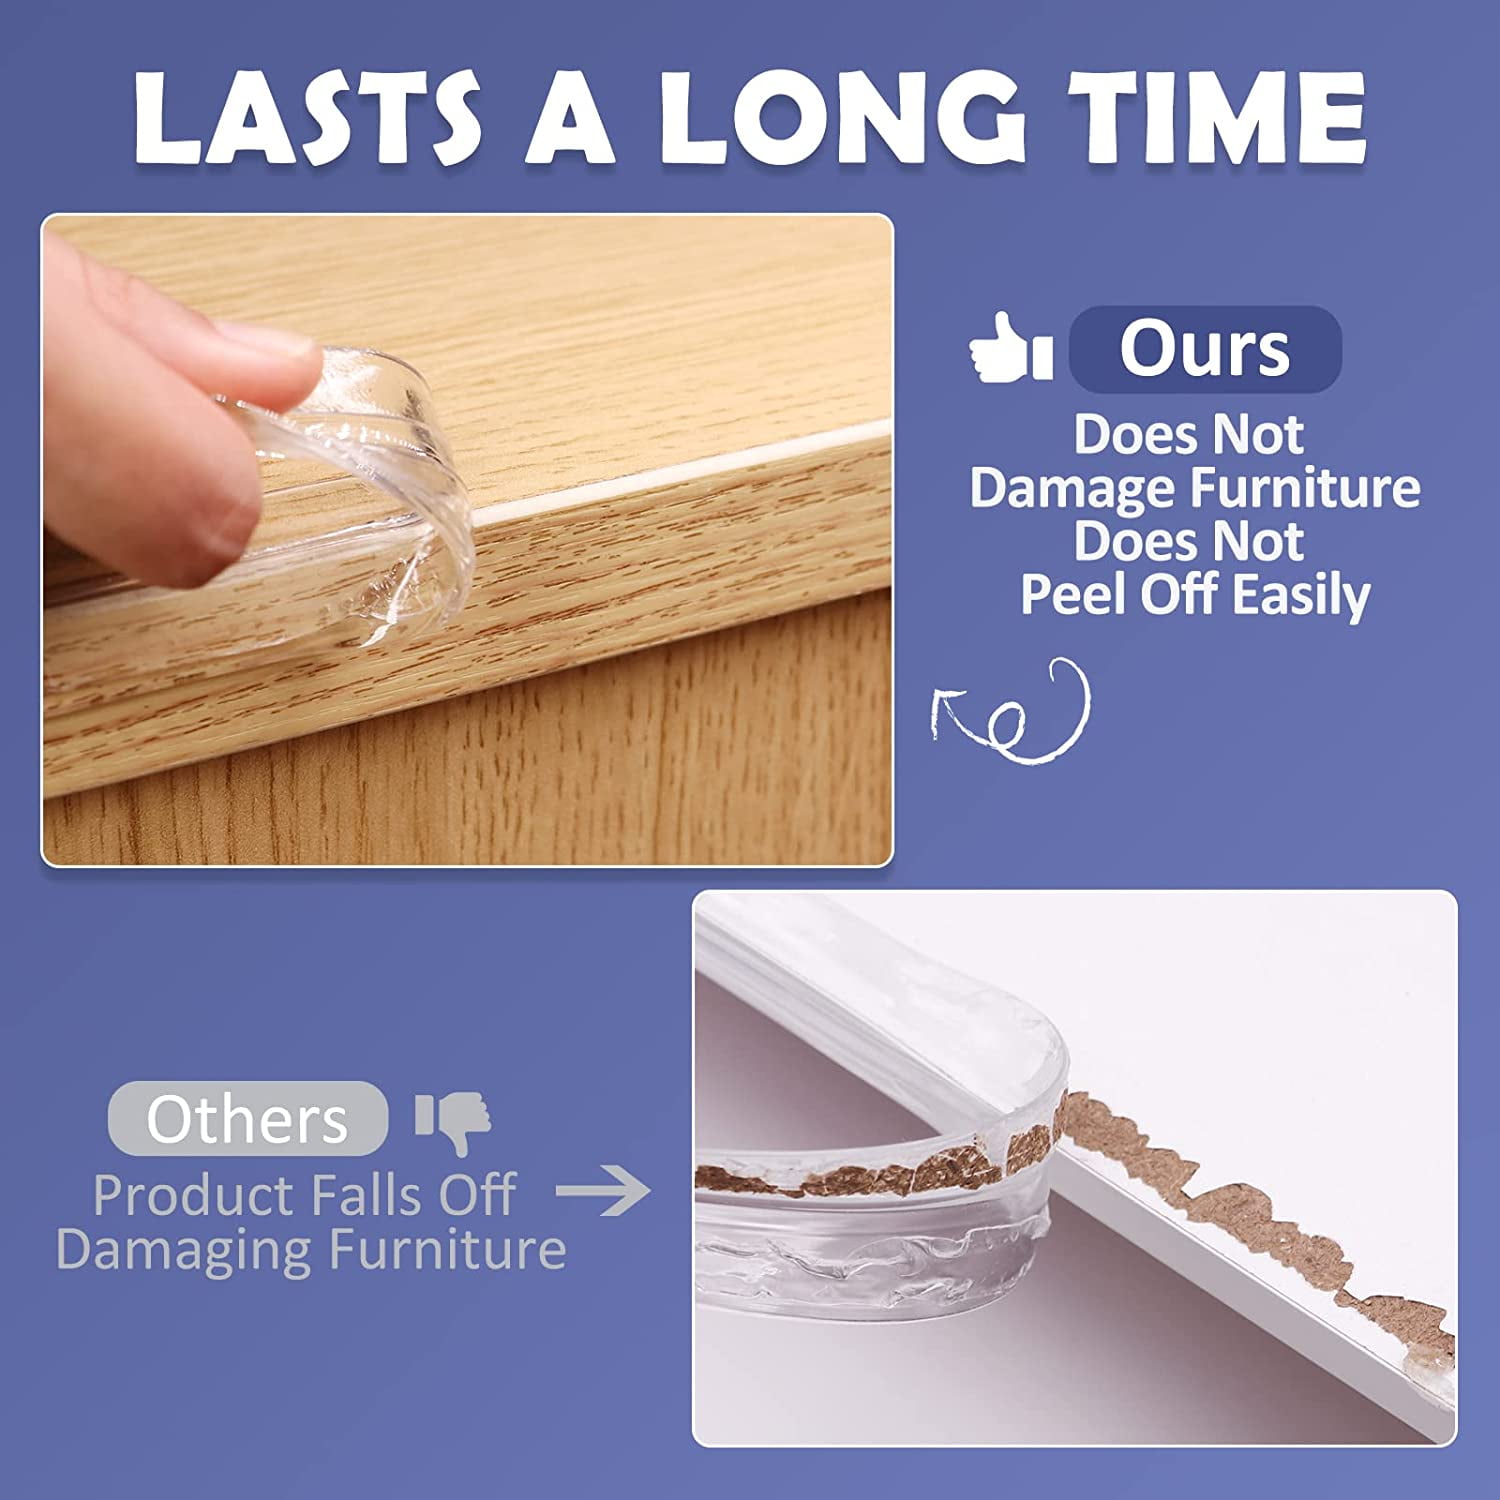 Tables Clear Edge Protectors for Furniture Soft Corner Protectors for Kids Baby Proofing Edge Protector Strip Drawers Cabinets 9.84ft Pre-Tape Adhesive Corner Protectors with 4 Corner Guards 